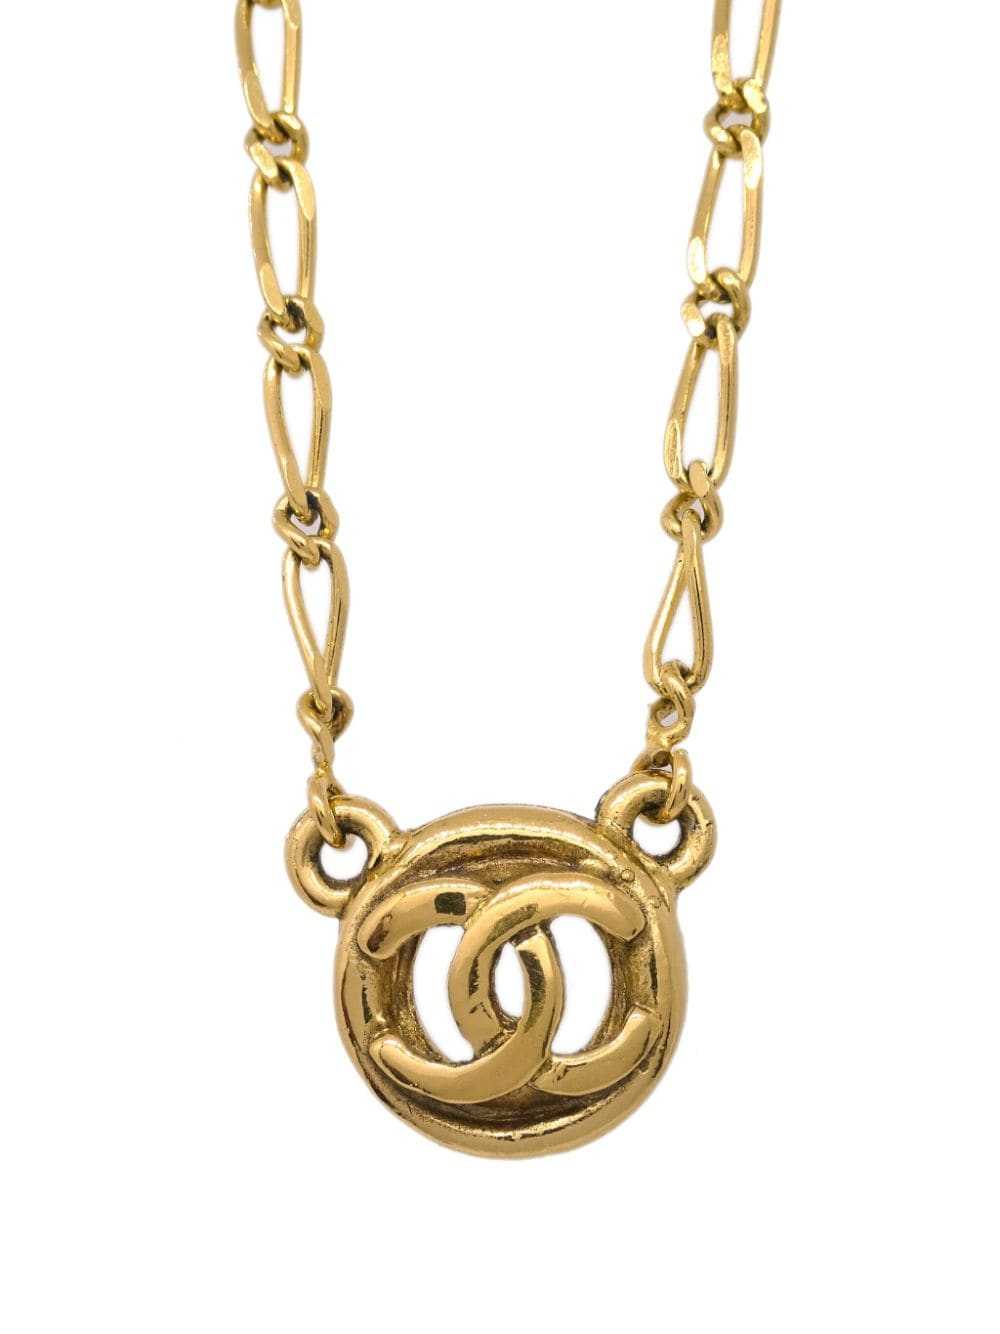 CHANEL Pre-Owned 1982 CC medallion necklace - Gold - image 2